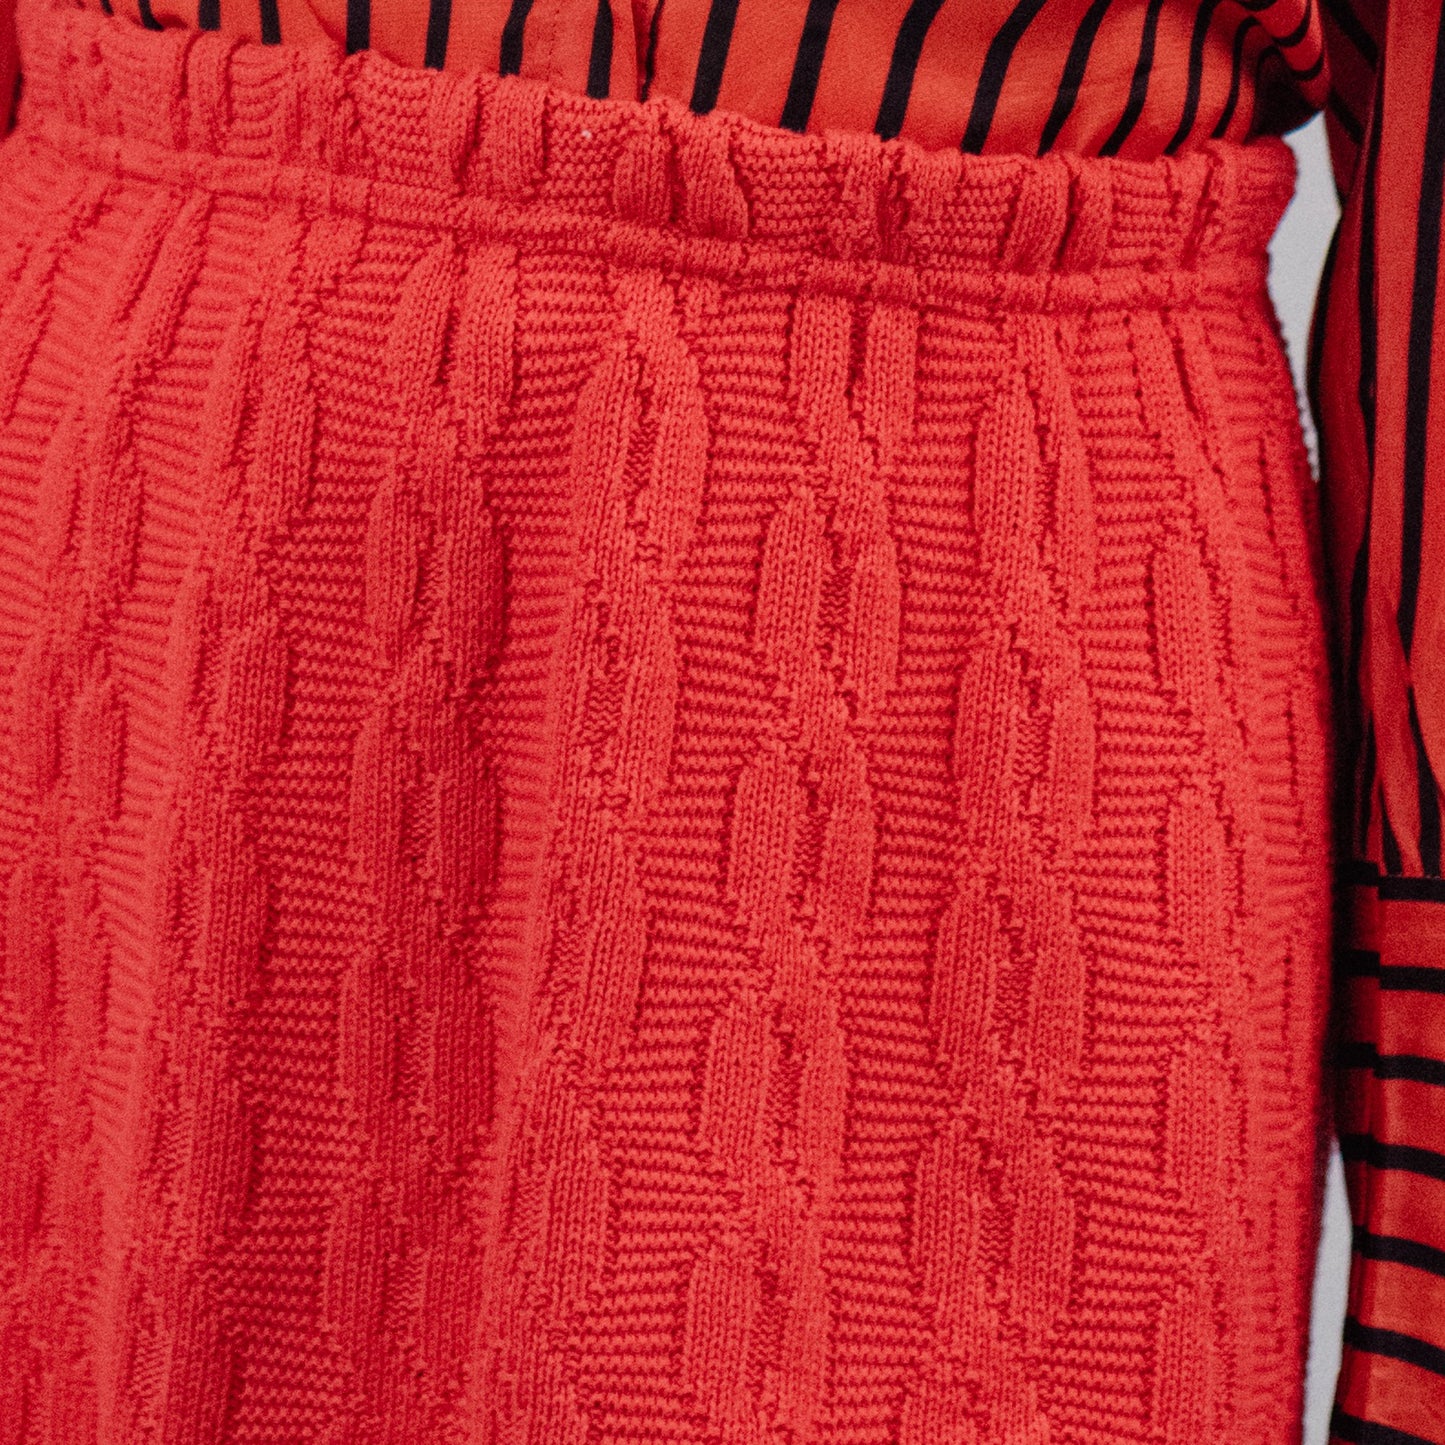 Vintage Cherry Red Cable Knit Skirt / S - Closed Caption